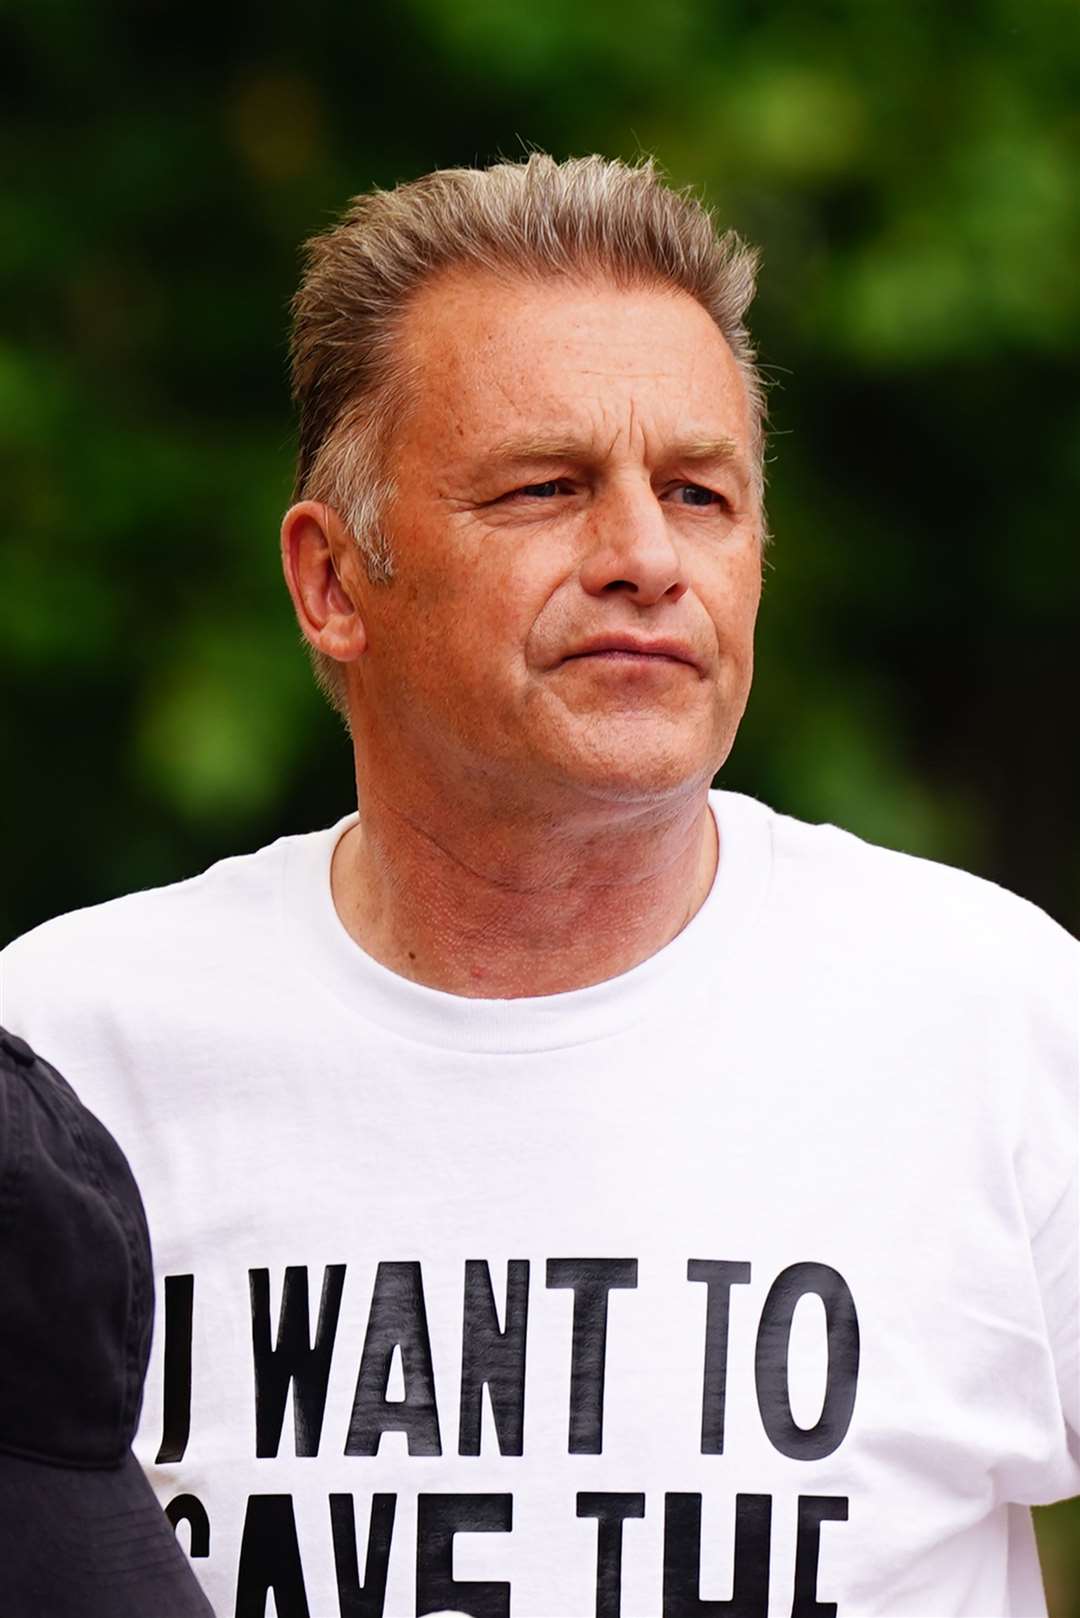 Chris Packham took part in the protest (Aaron Chown/PA)